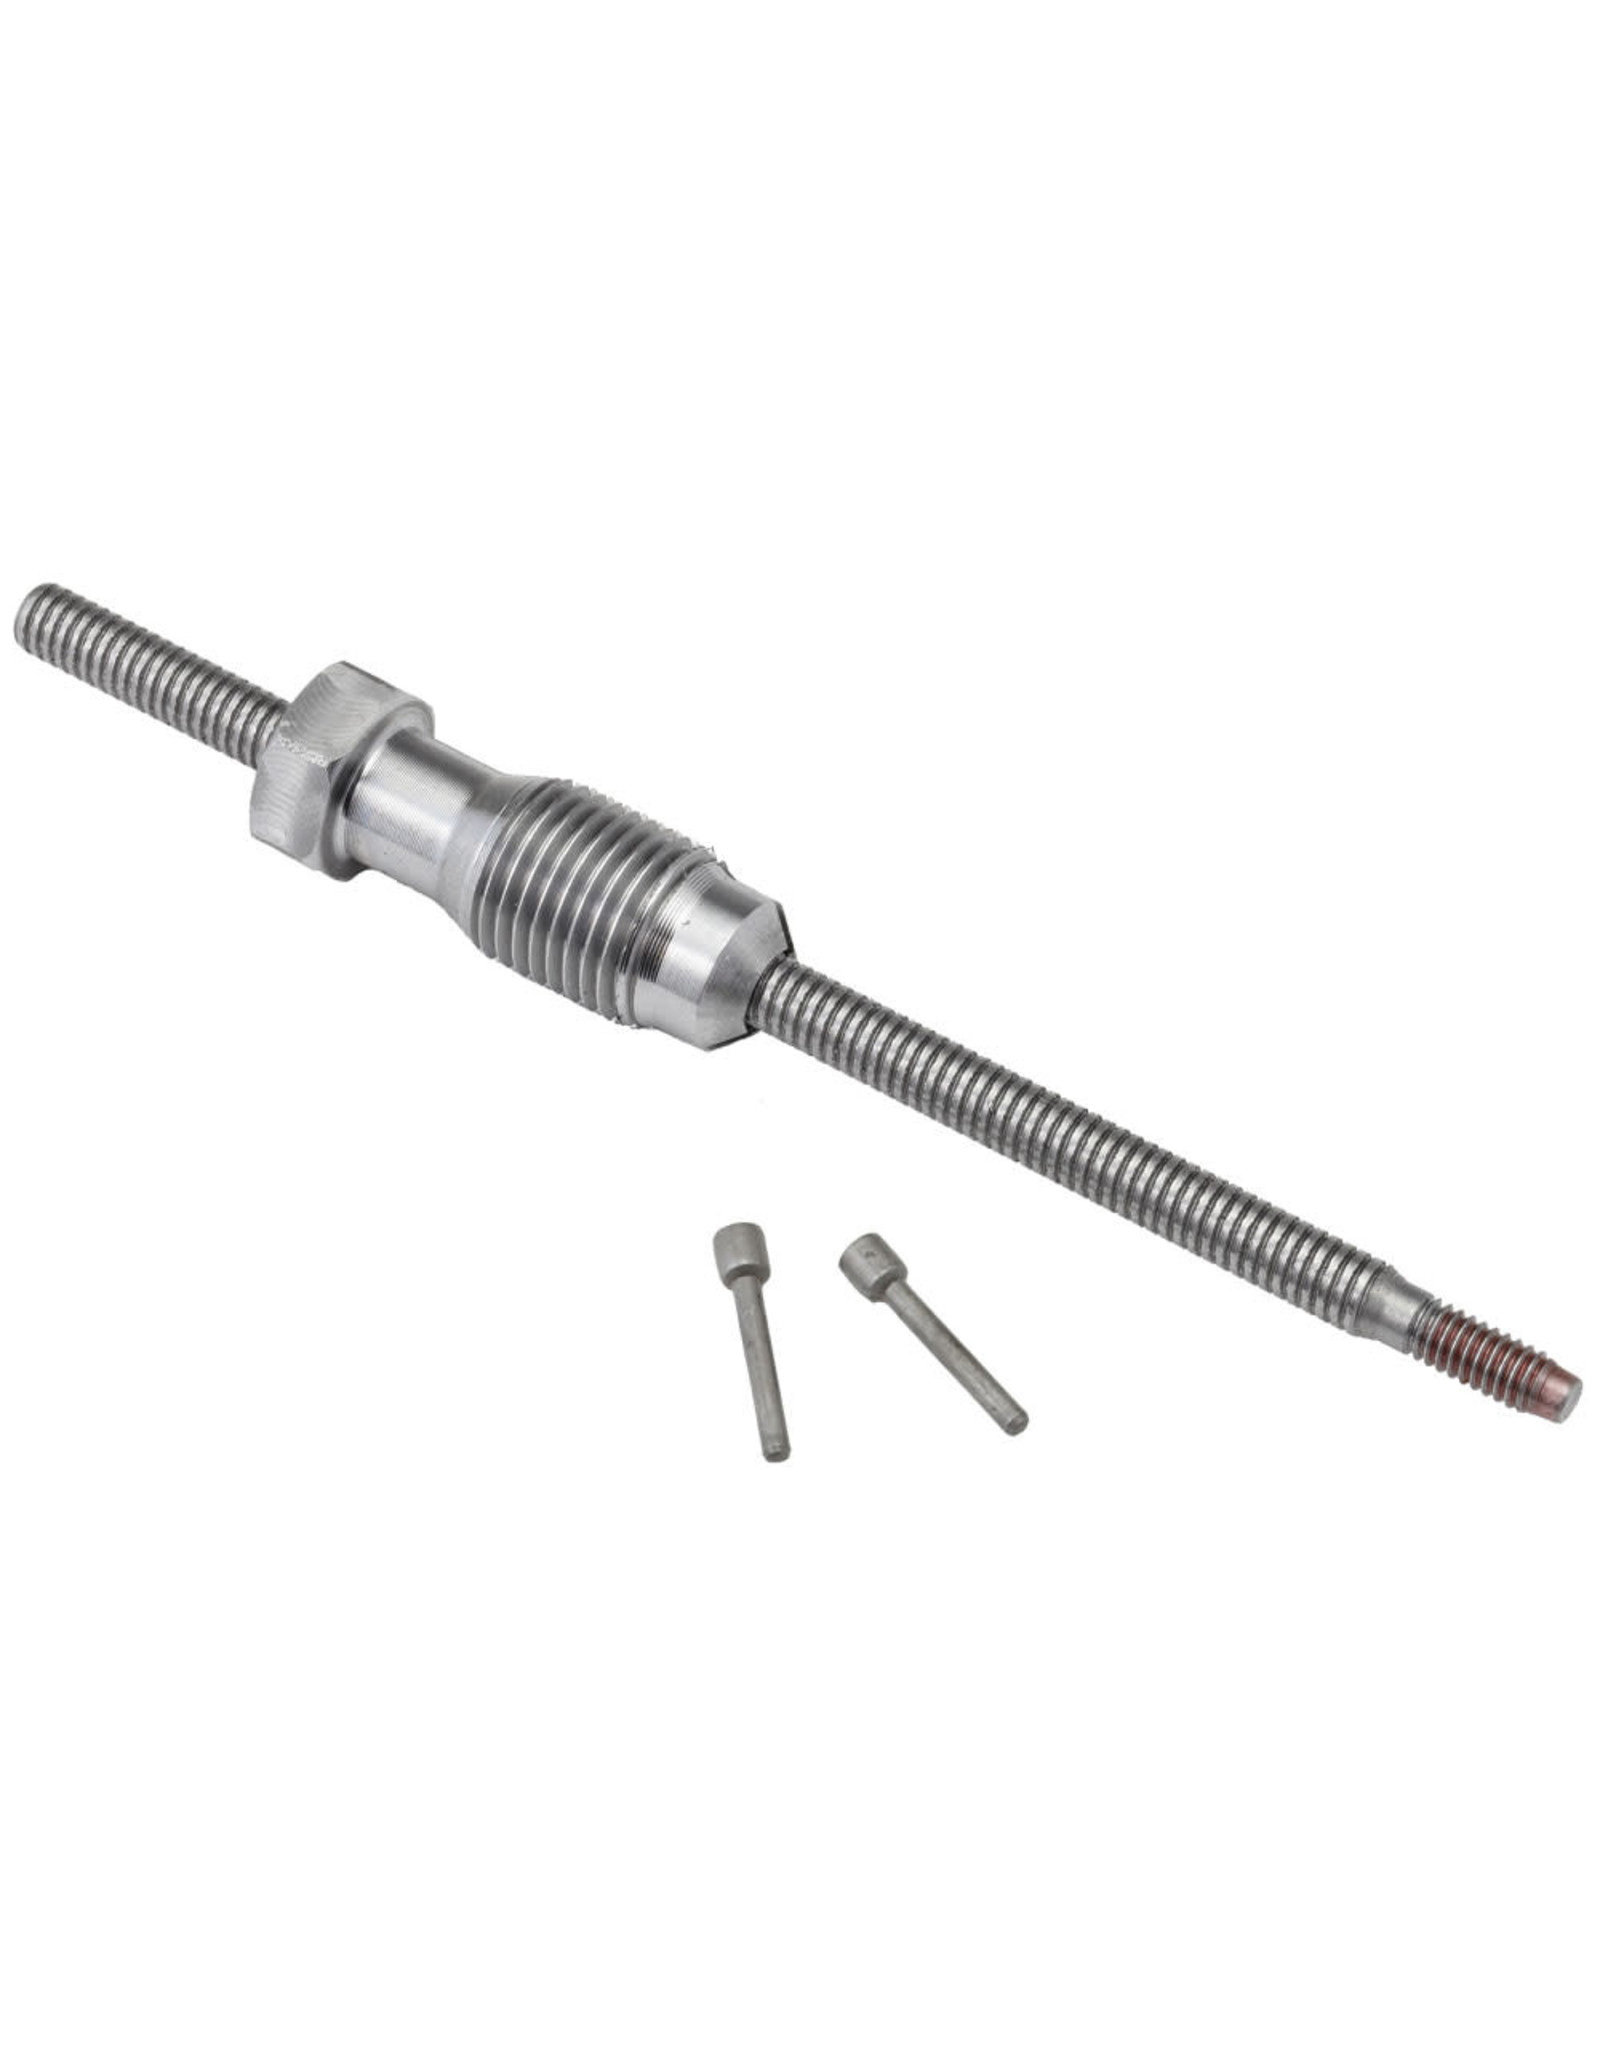 Hornady Zip Spindle Kit .17-.20